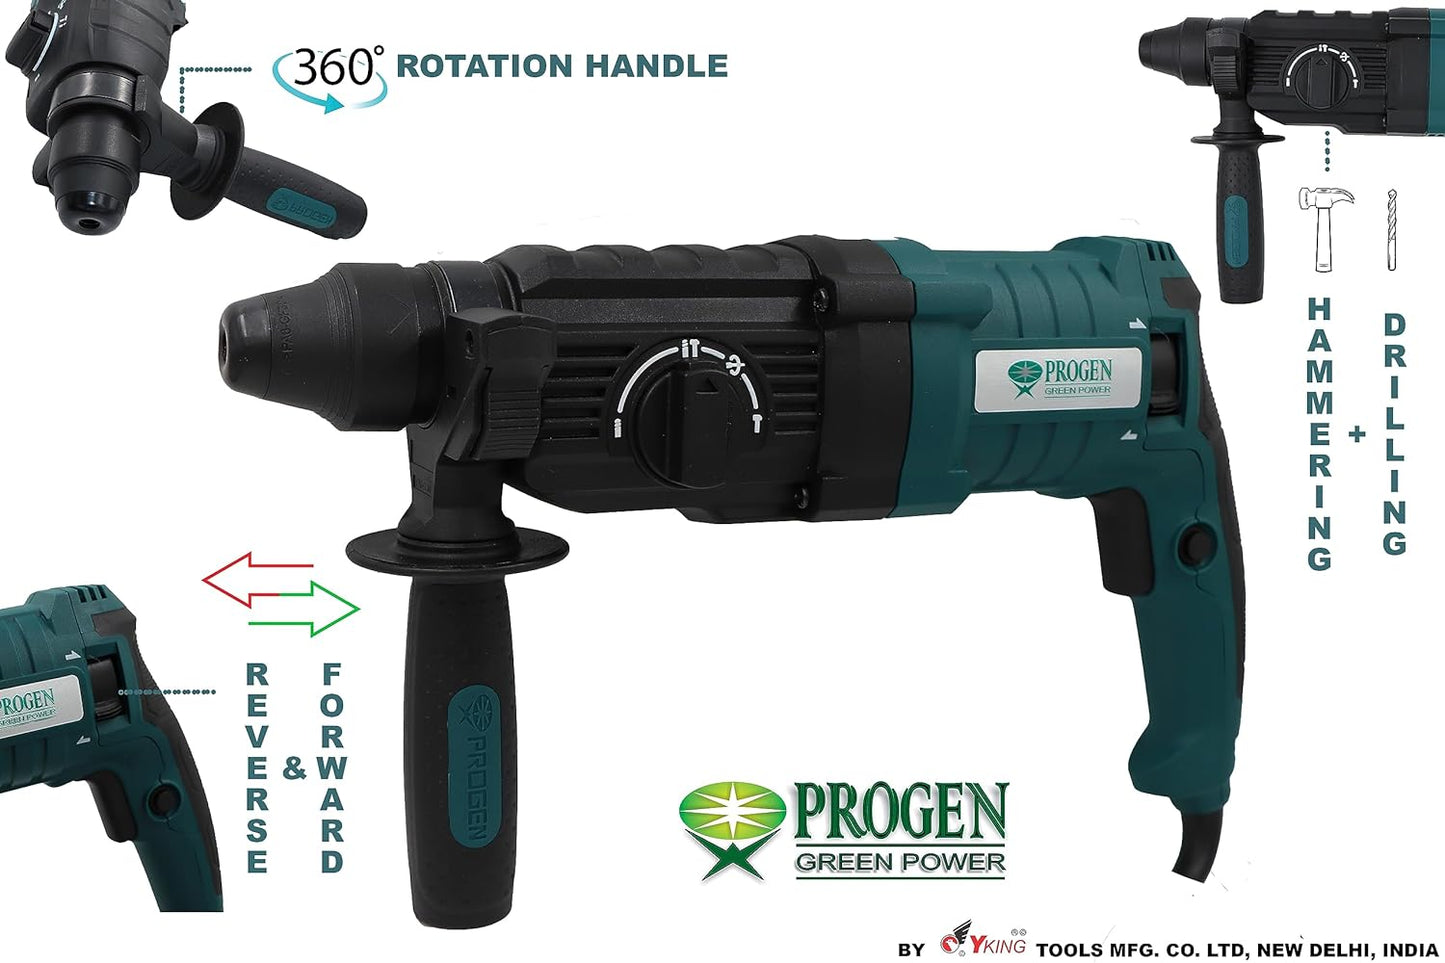 PROGEN 9226HG 980W 26mm Heavy Duty Variable Speed Reversible Rotary Hammer Drill with 5 Bits For Hammering, Chiseling on Wood, Metal, Concrete (1300 Rpm)